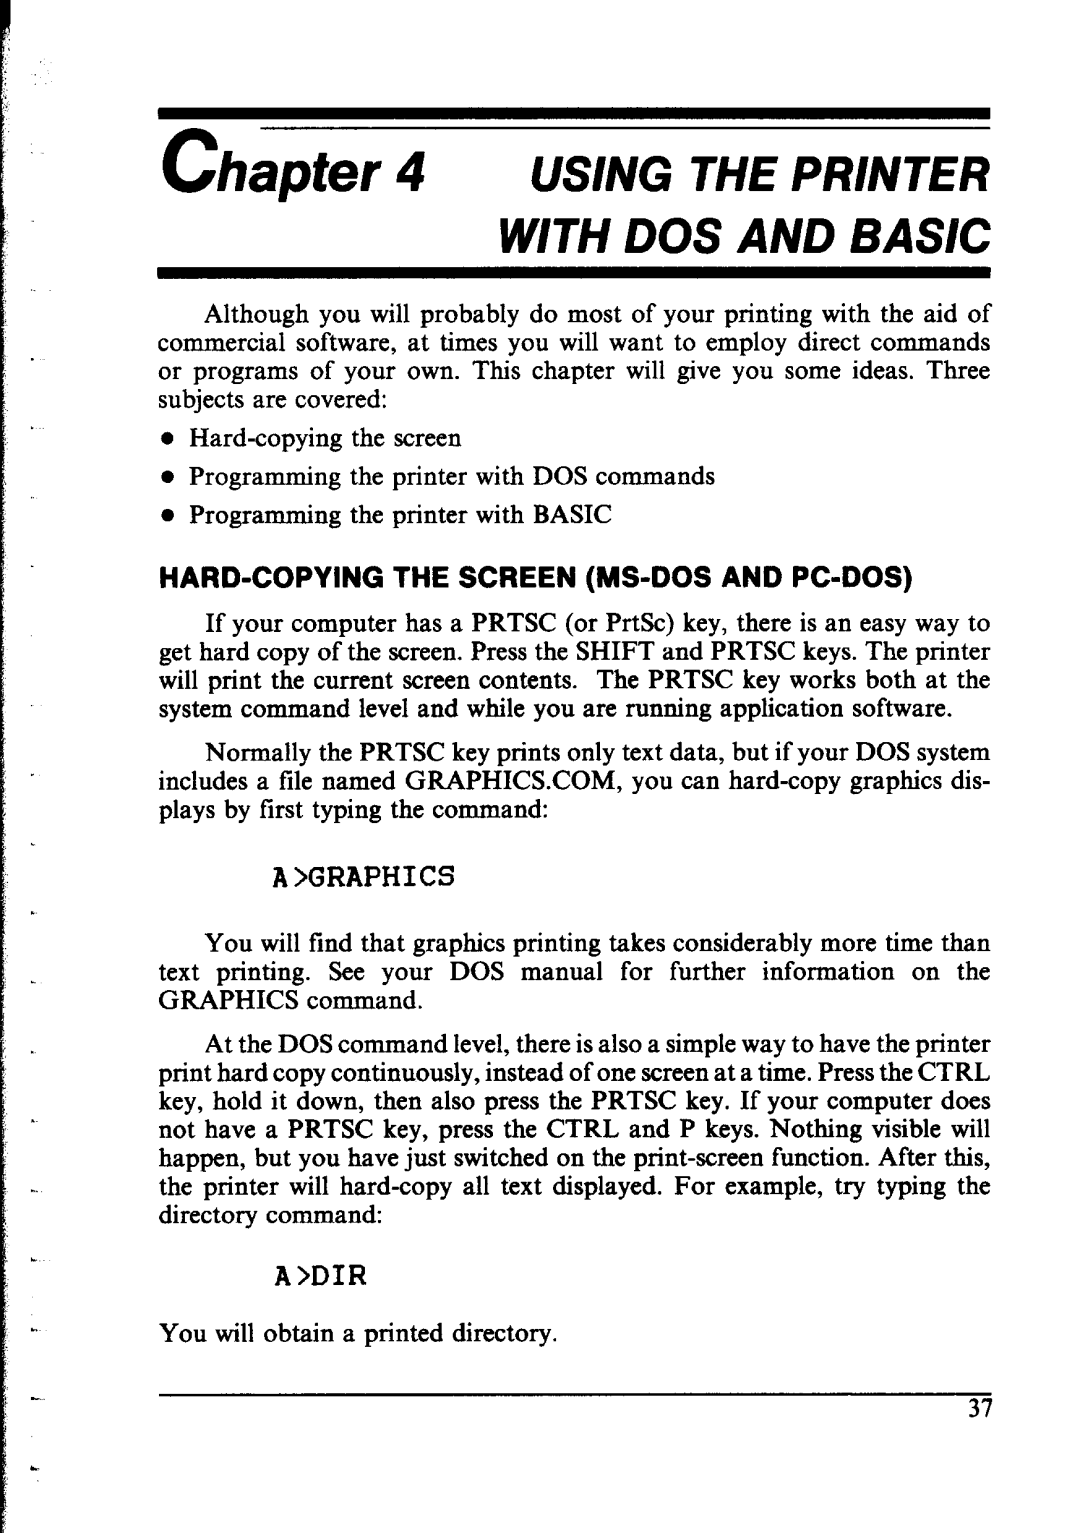 Star Micronics NX-1000 manual Using The Printer With Dos And Basic, Hard-Copying The Screen Ms-Dos And Pc-Dos 